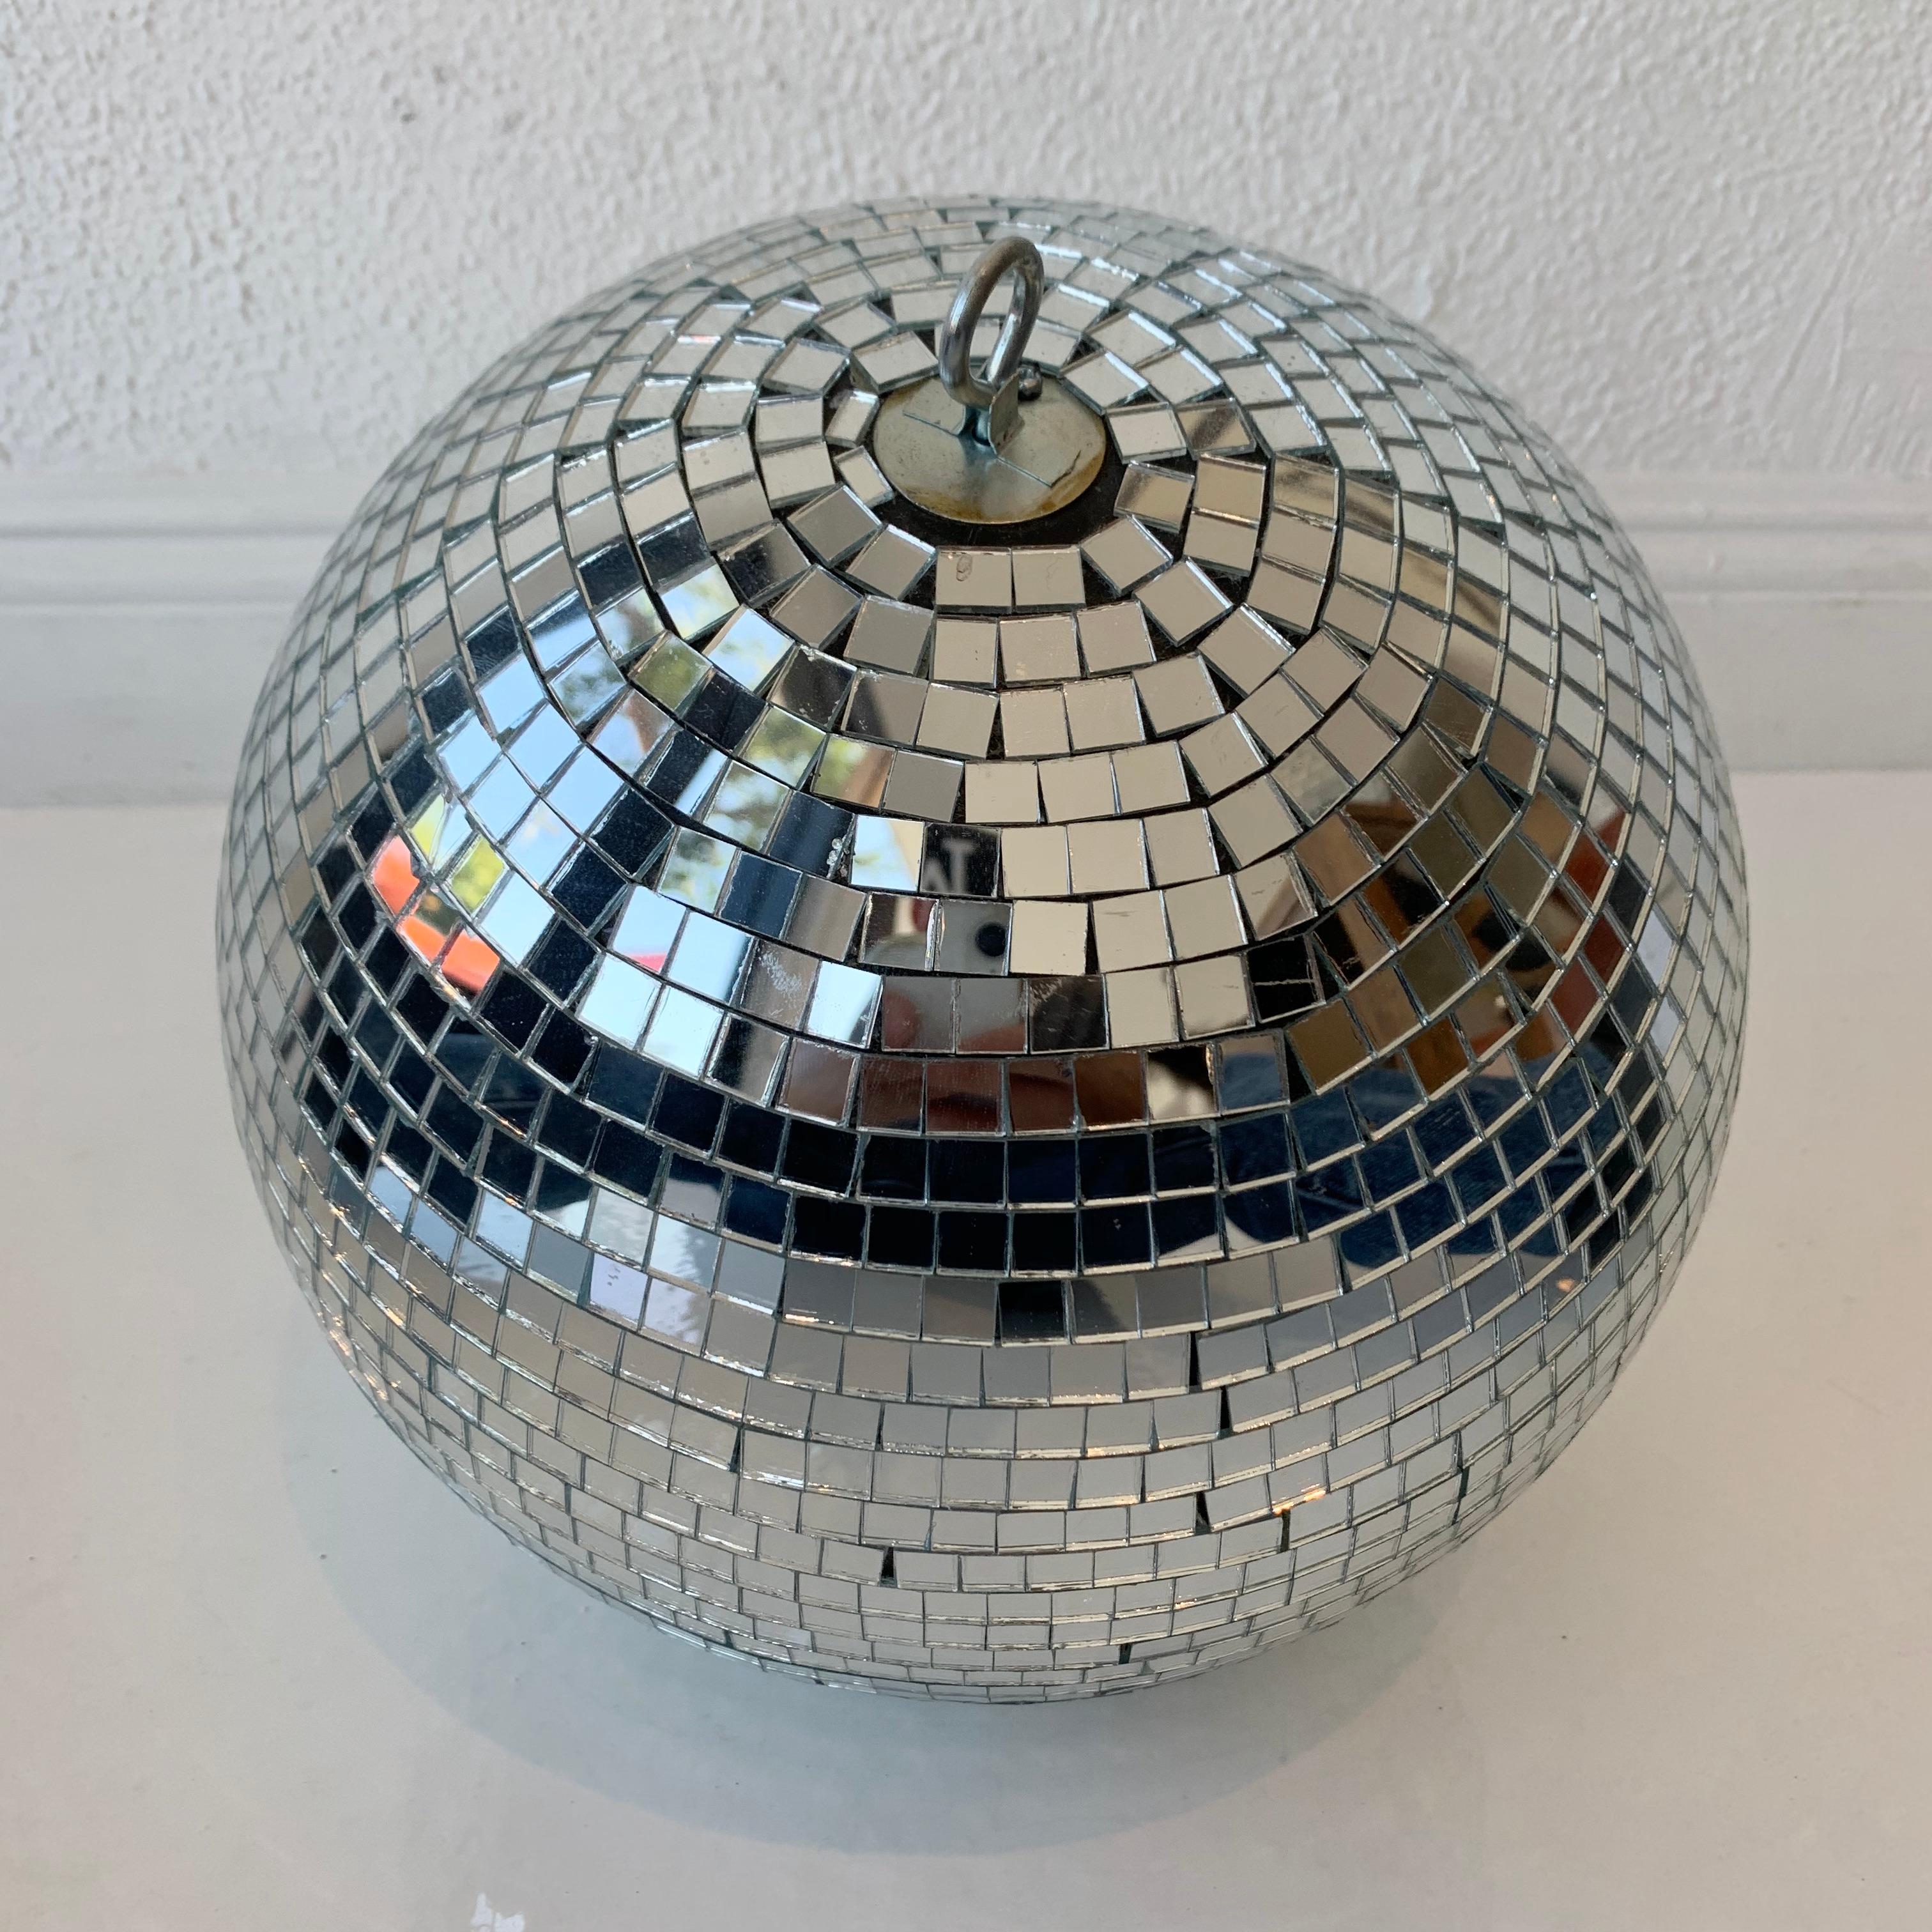 Great retro disco ball made out of miniature square pieces of glass. Good condition. Illuminates beautifully. Sold with a metal chain. Can adjust overall height before shipped out.

Measurements: Diameter of ball is 12.